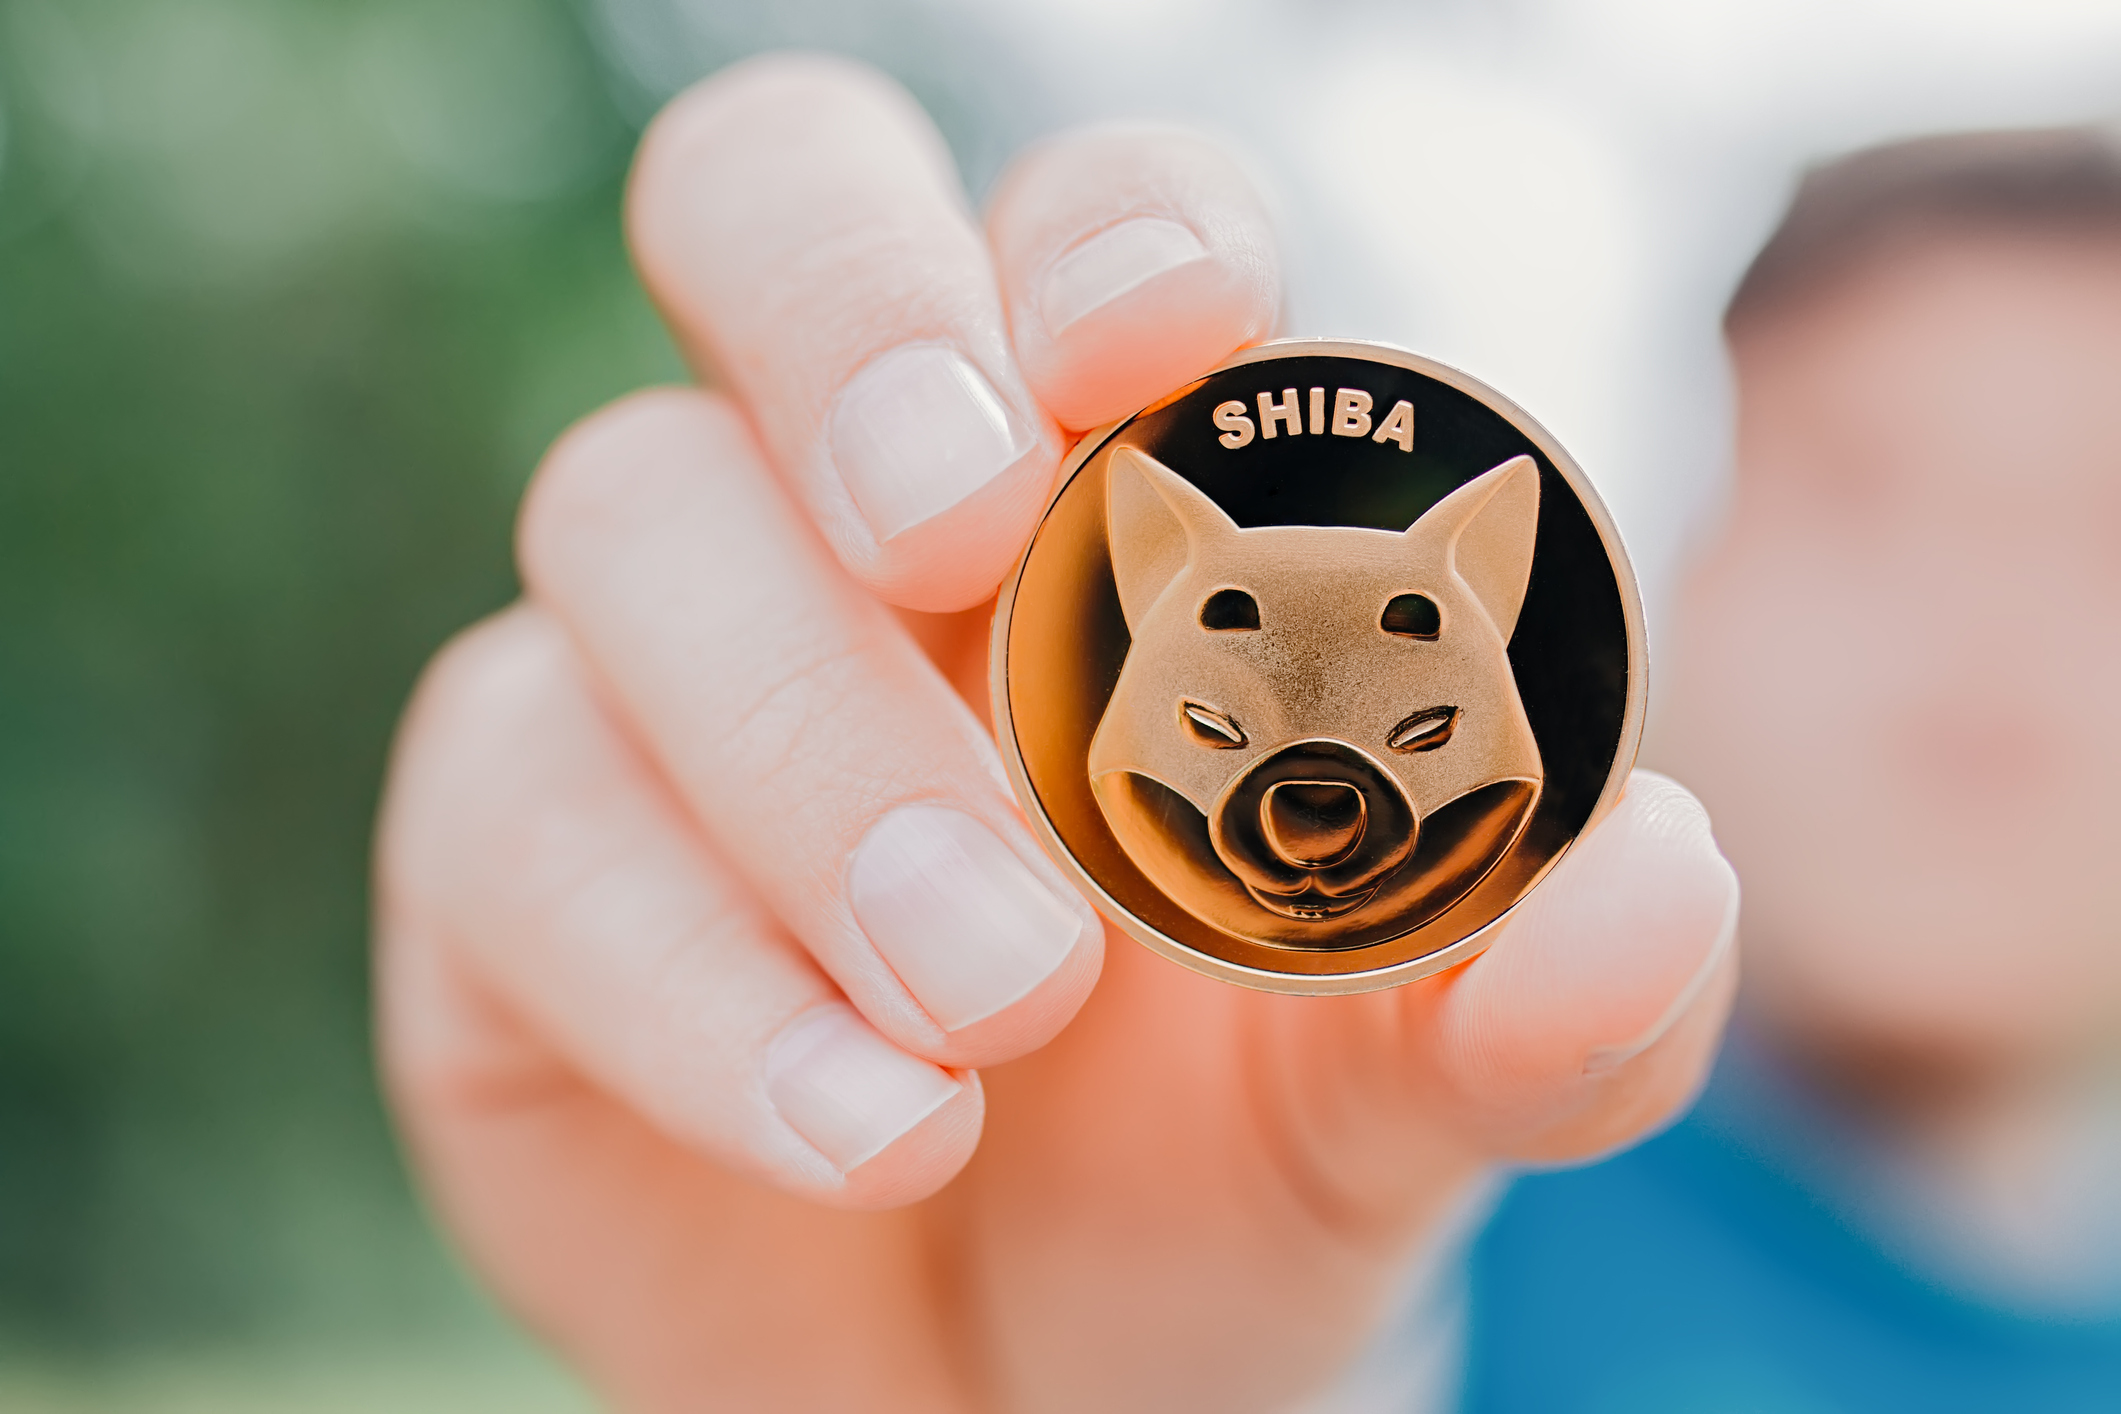 Shiba Inu Records Accelerated Burn Rate, But Price Fails To Respond